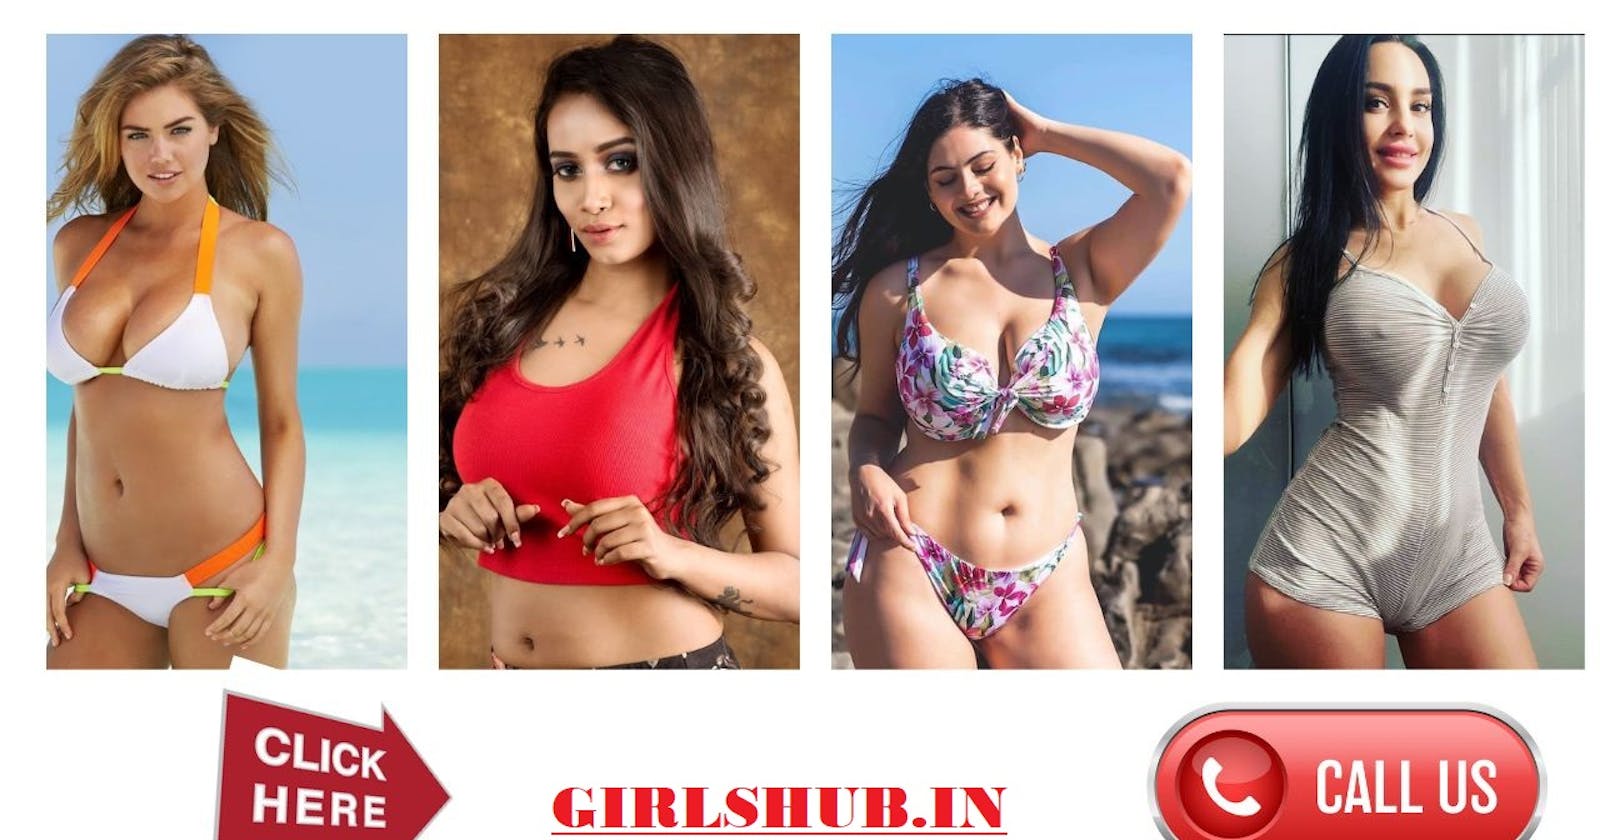 How to Find the Best Jodhpur Call Girl Service in 3 Easy Steps